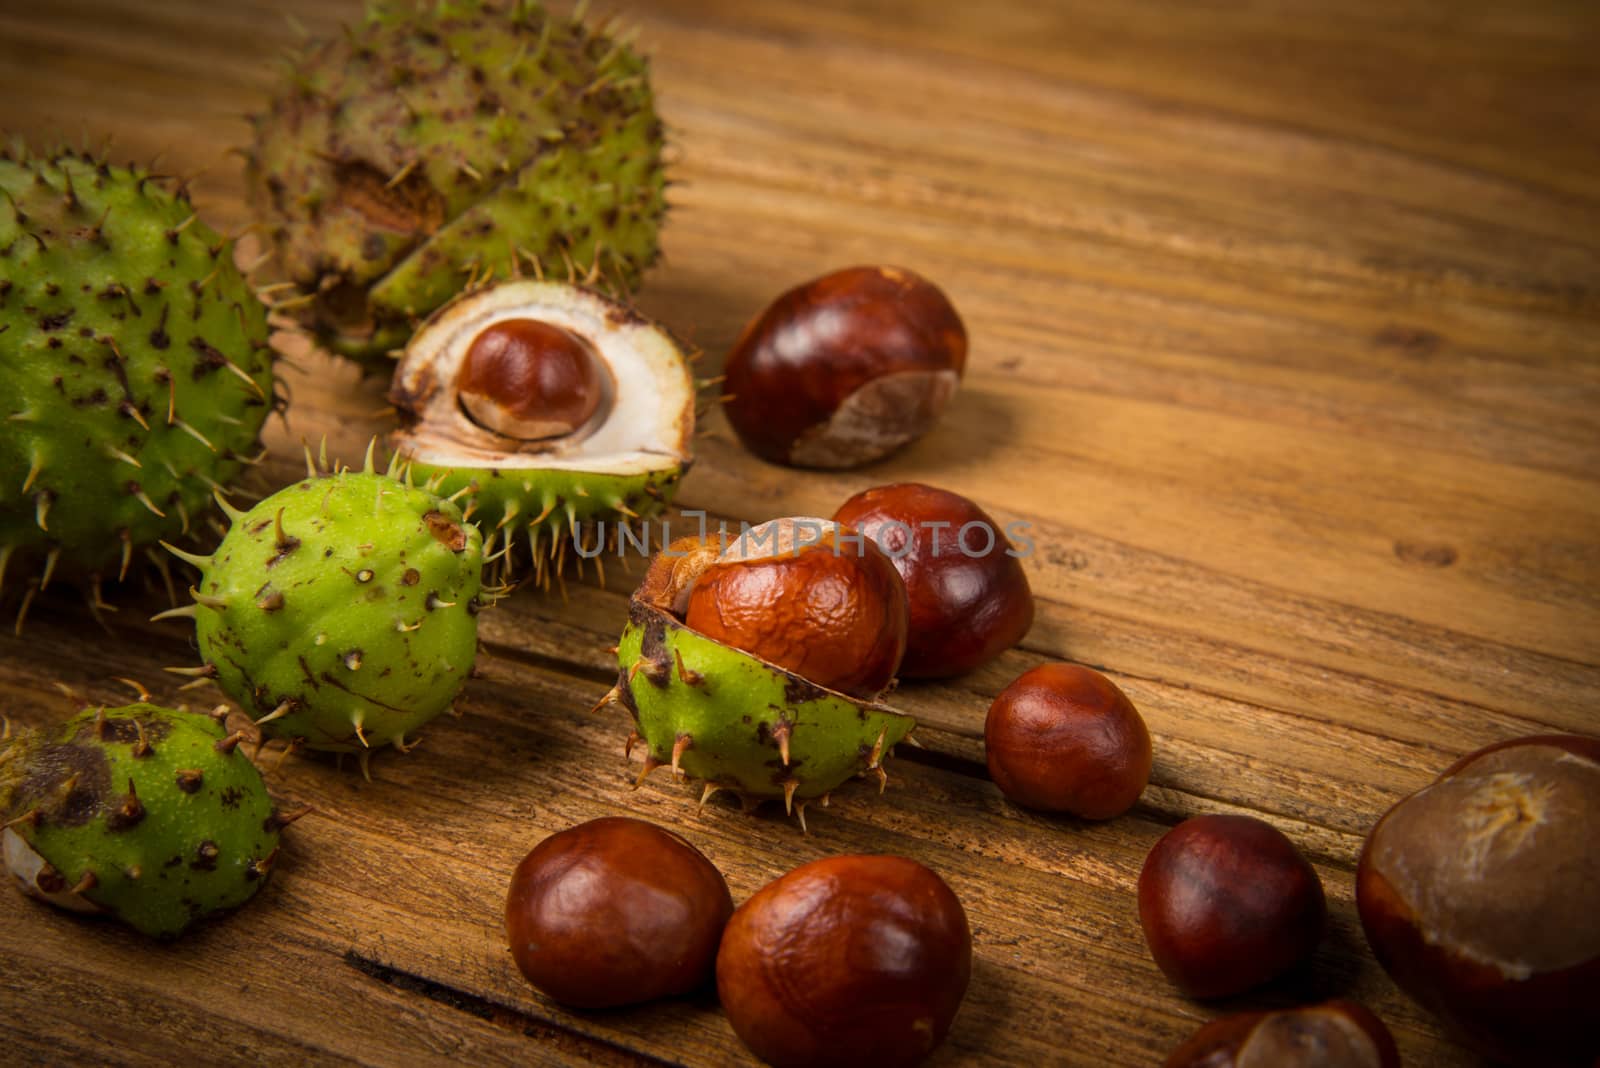 Autumn fruits of chestnut and acorn on wooden retro table in fall colours